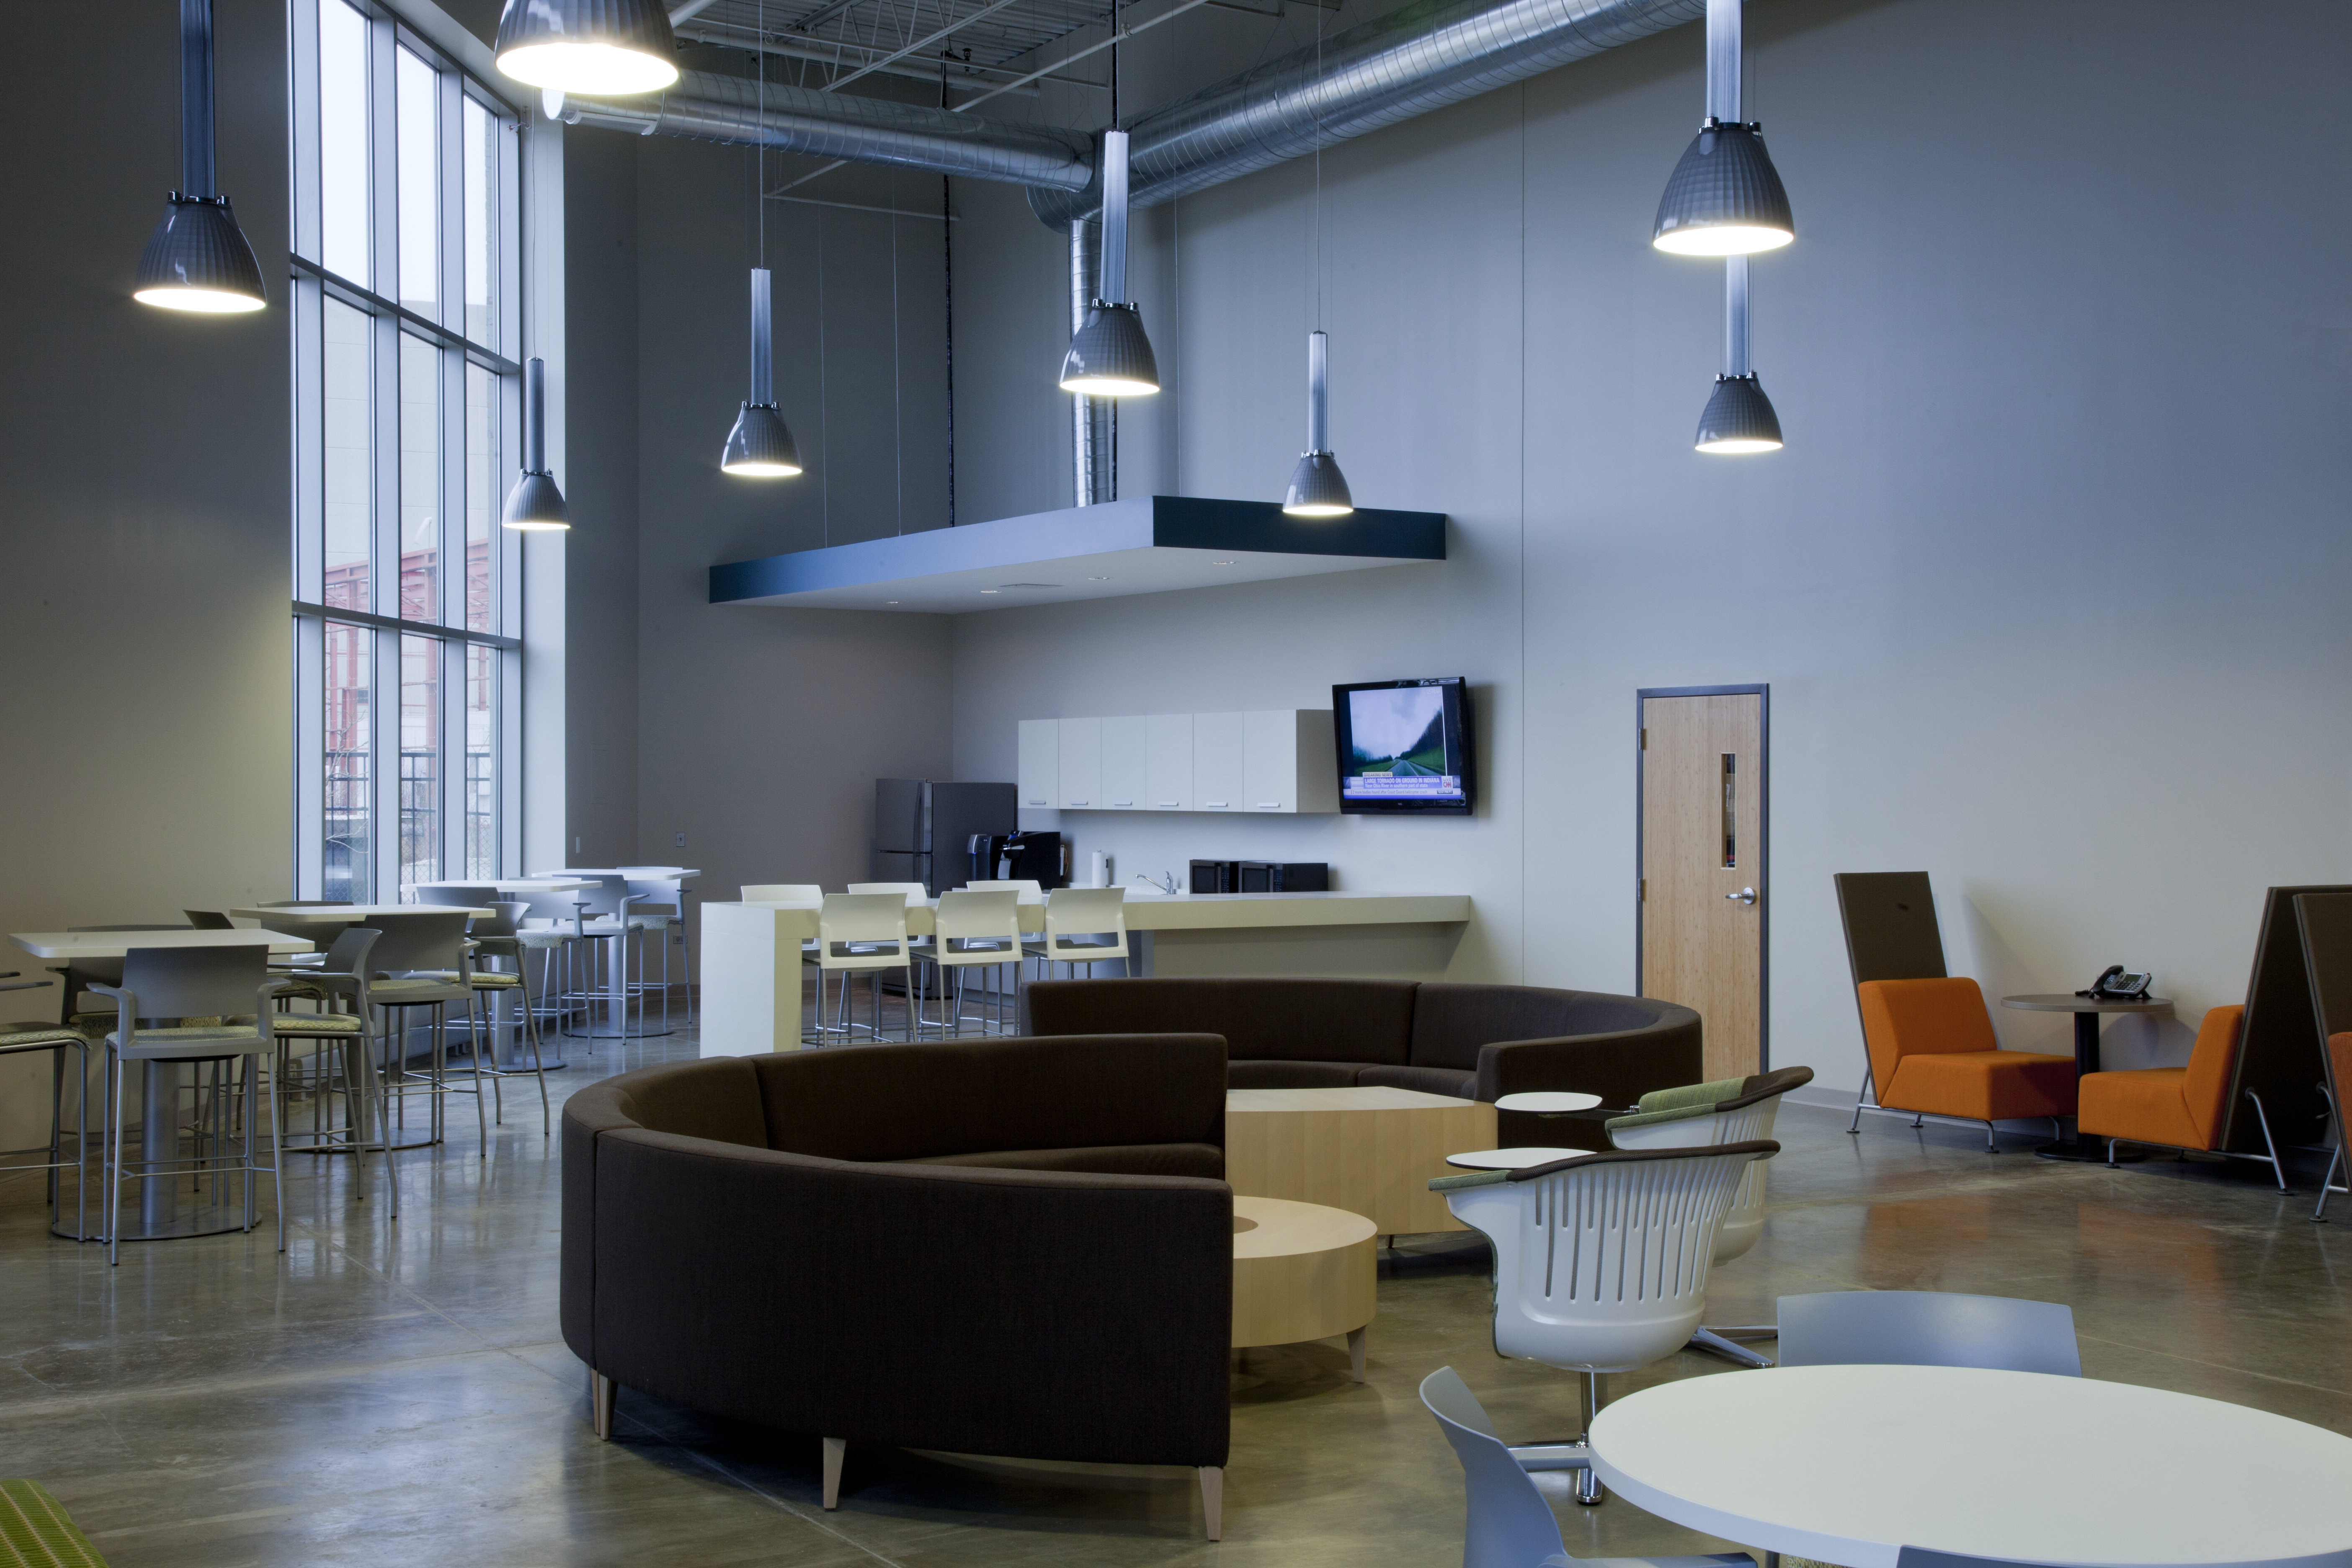 The Office Concepts build-out included approximately 15,000-sf of office and 15